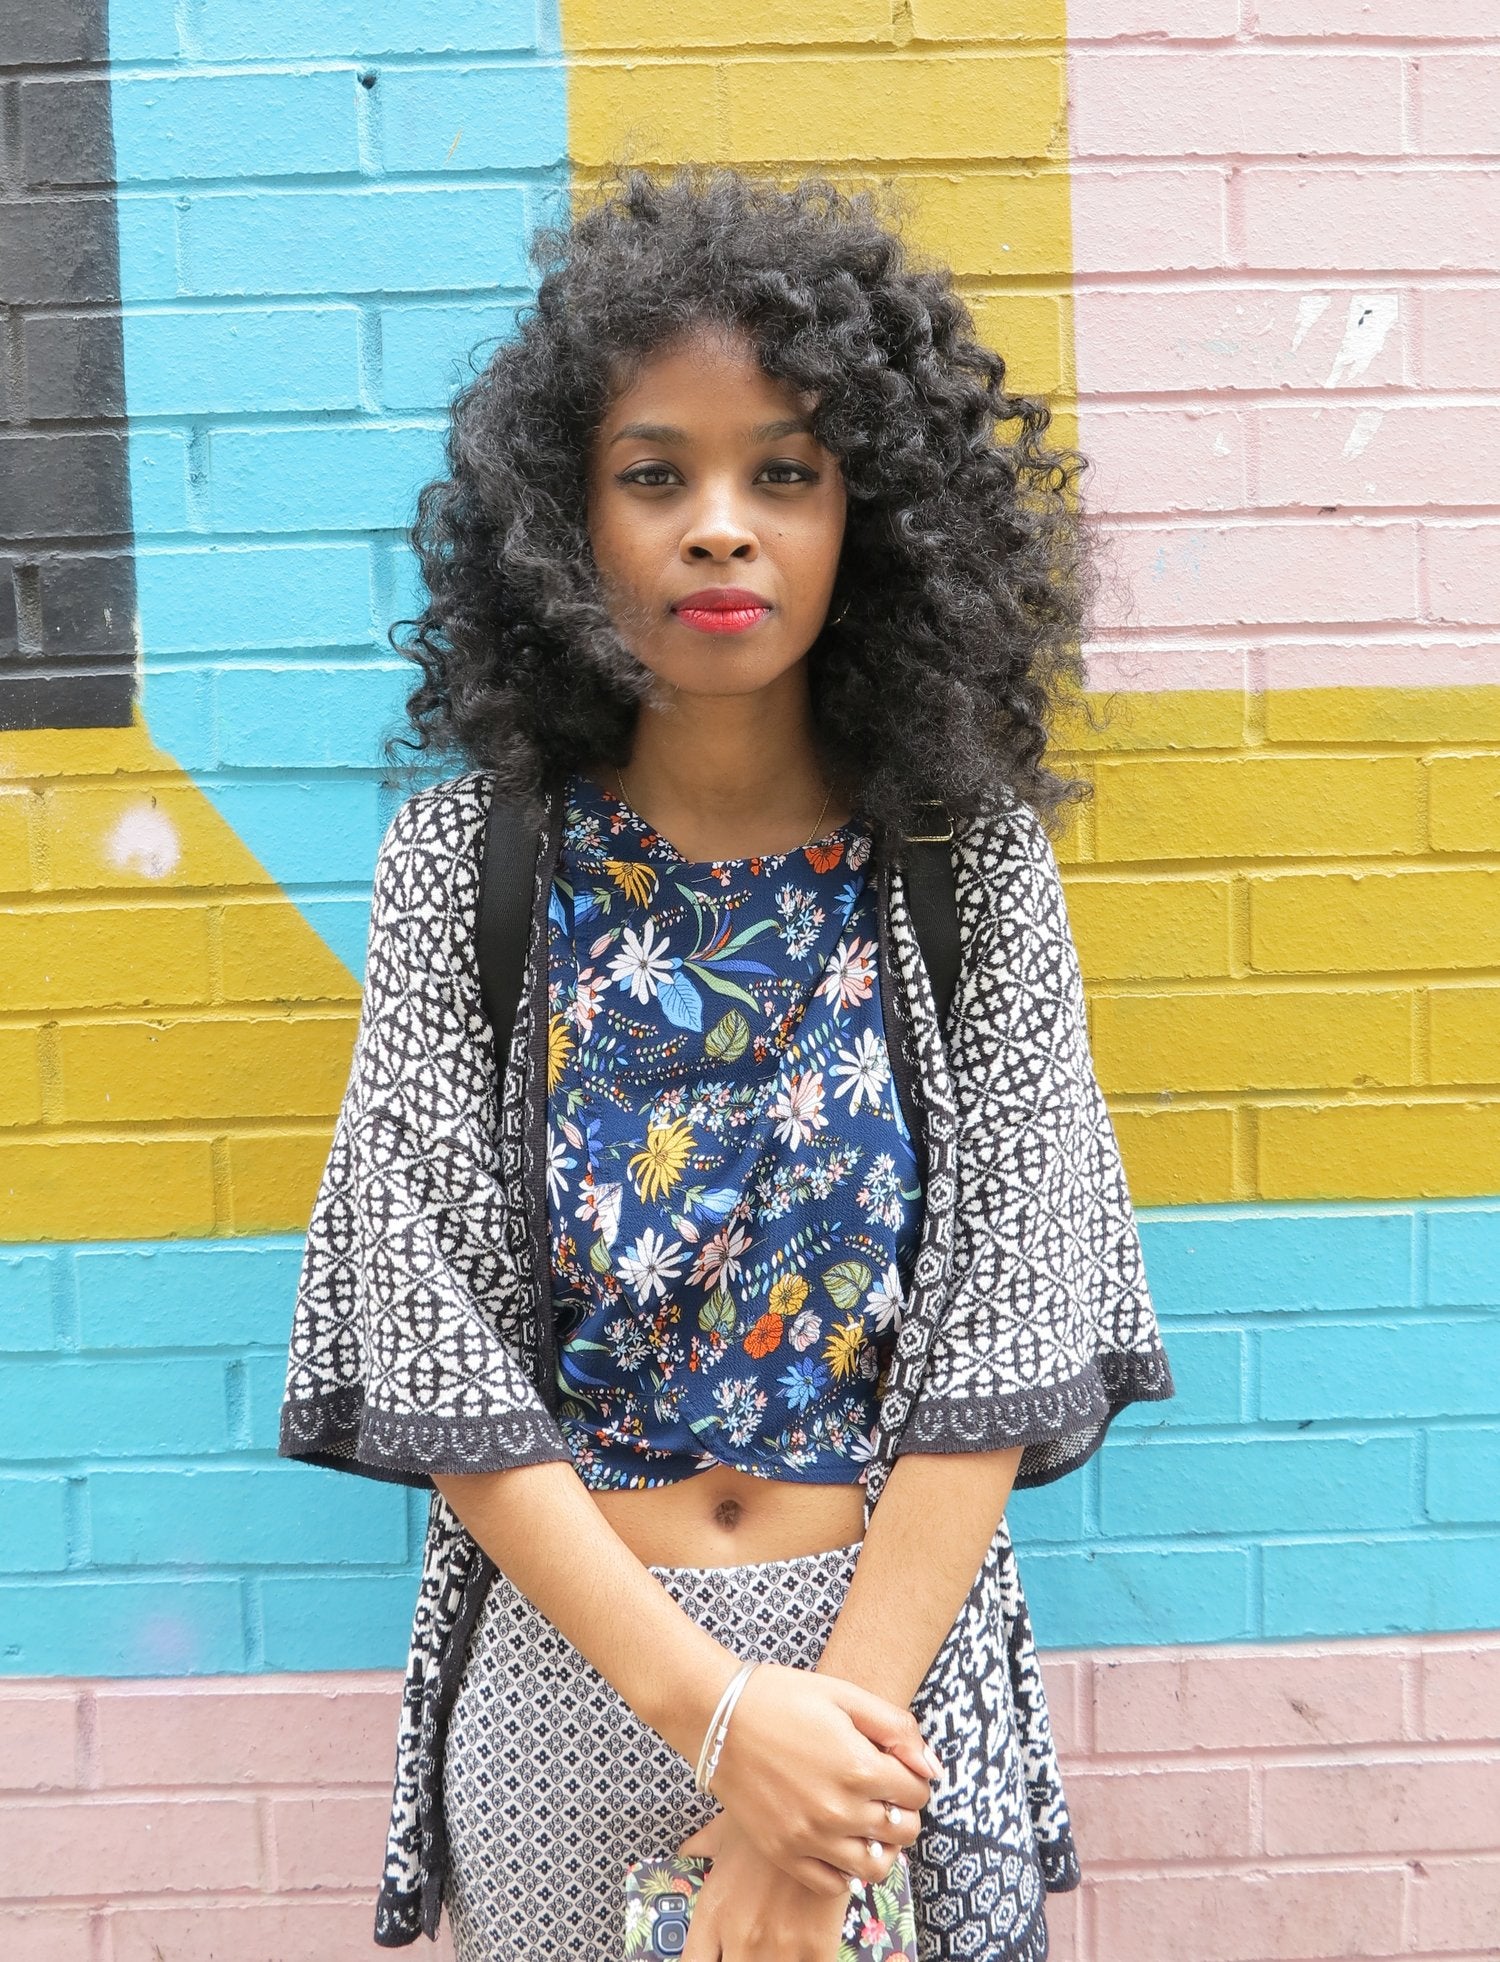 This Exhibition Celebrates Curly Hair In All Its Forms